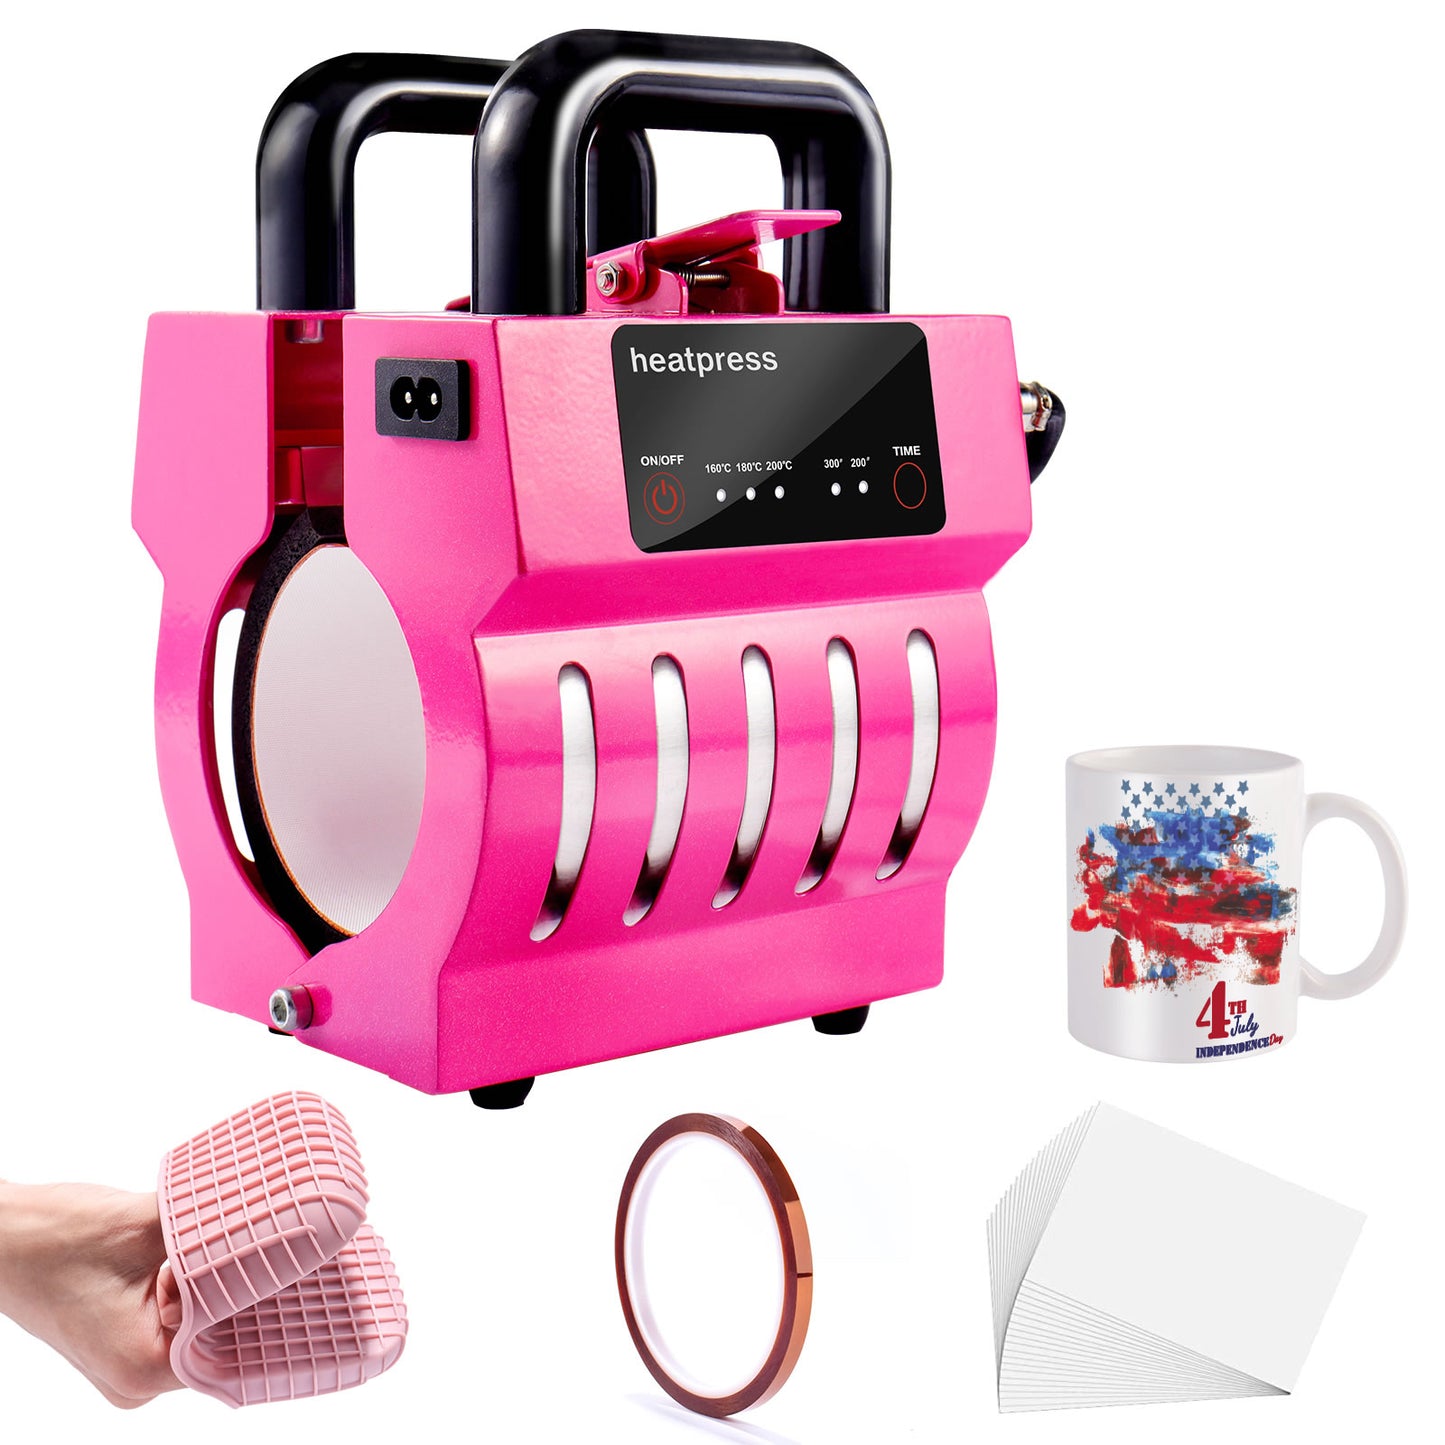 Sublimation Bundle Starter Package with heat and mug press, Sublimation  Bundle Starter Package with heat and mug pressSublimation Printer, heat  press, mug press bundleThis bundle is a perfect way to get into